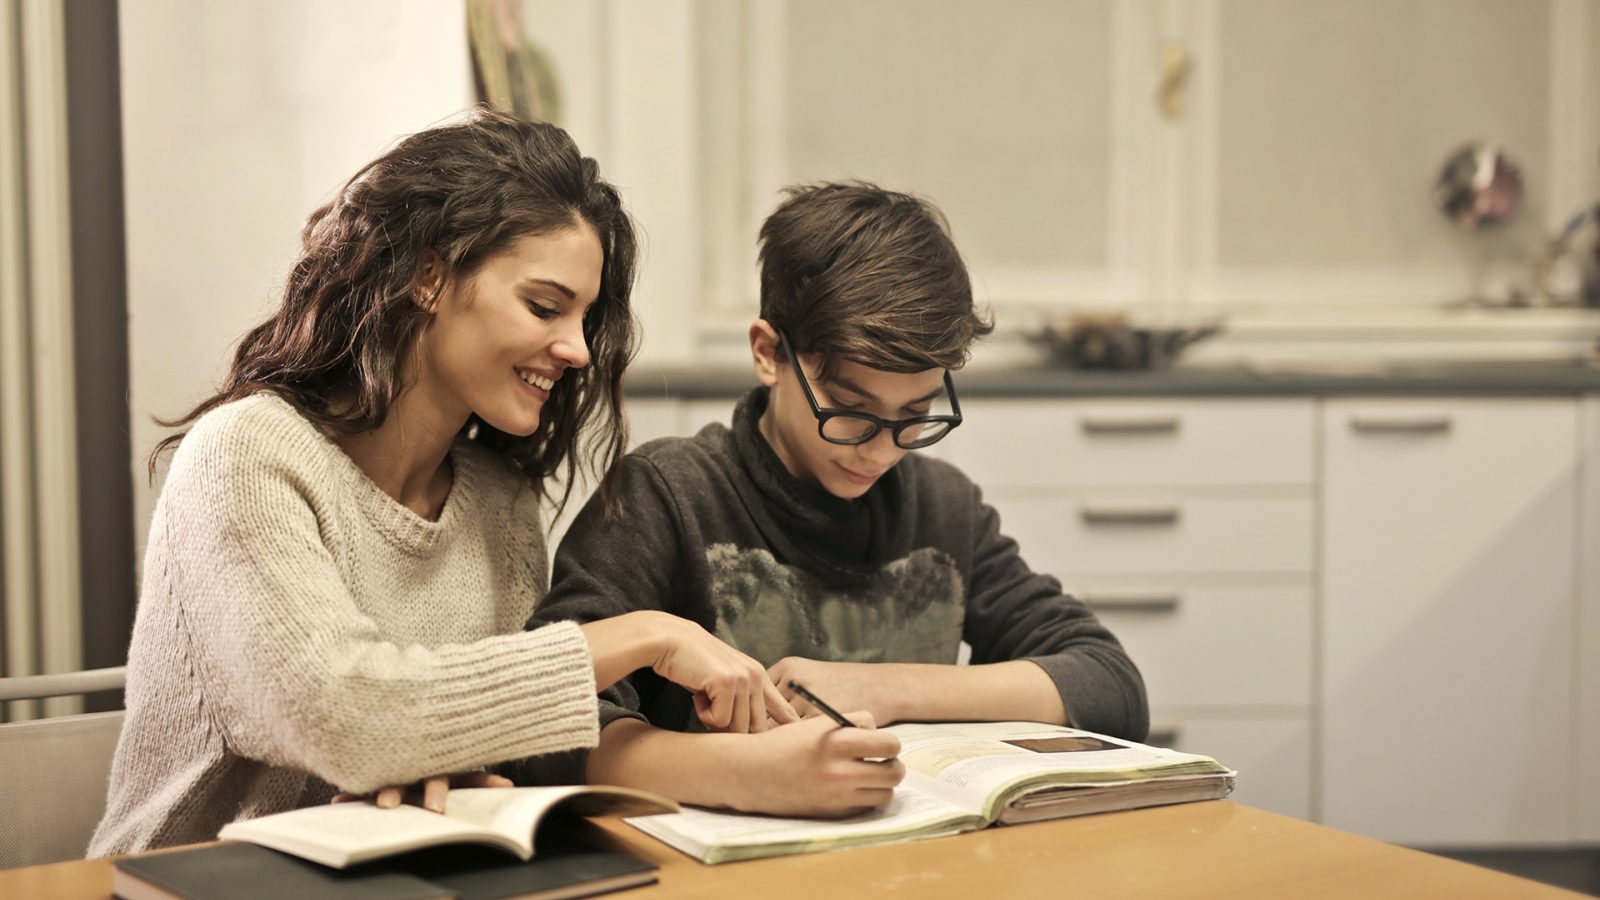 Elder sister and brother studying at home 3769981